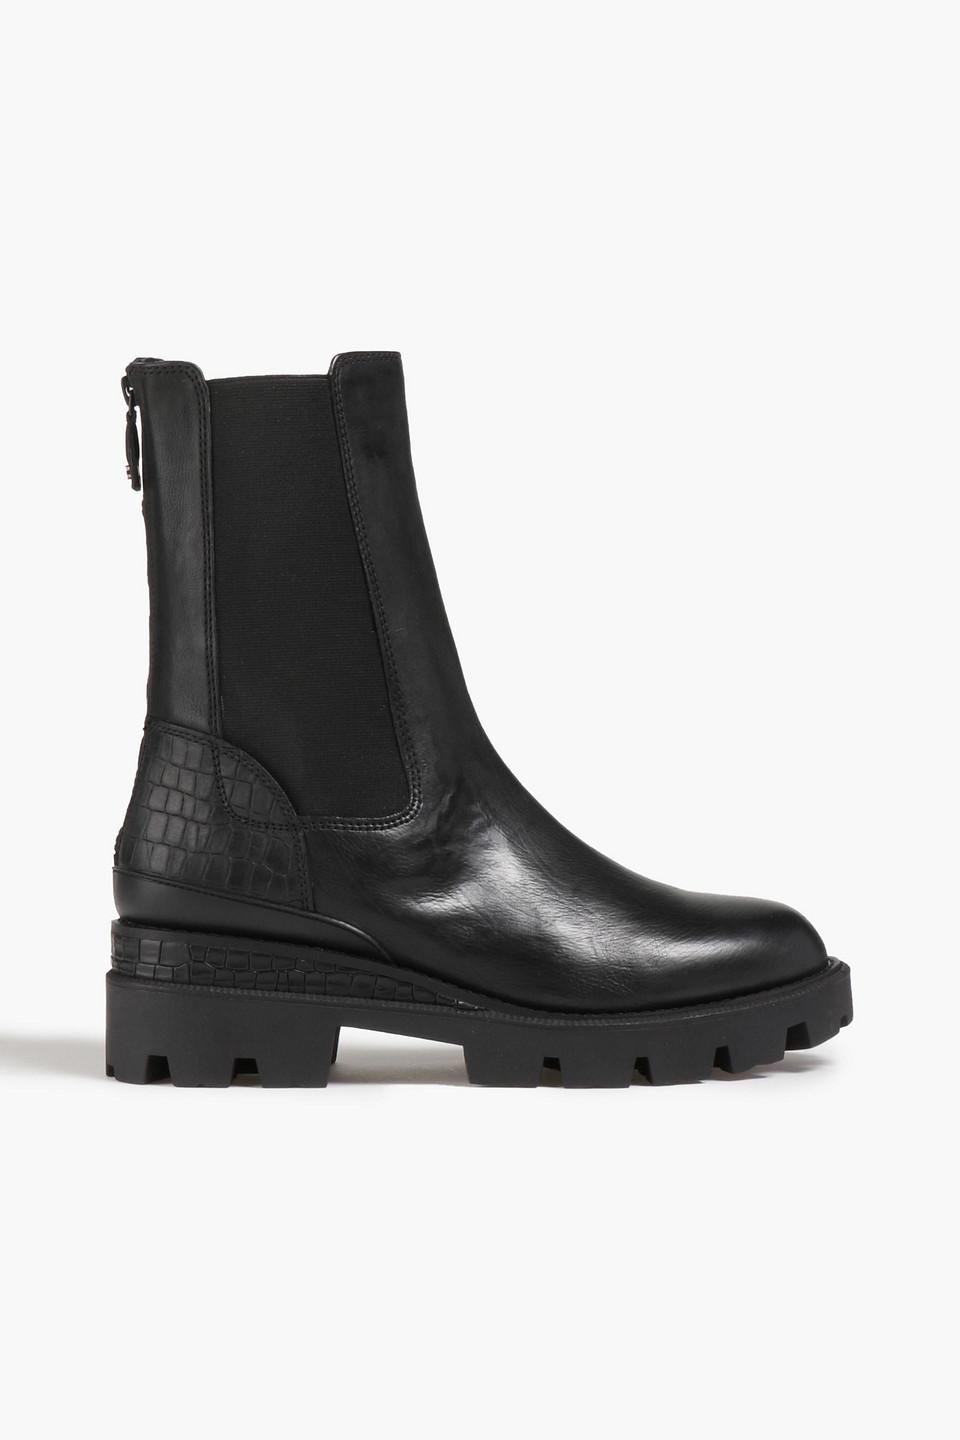 Sam Edelman Genia Smooth And Croc-effect Leather Chelsea Boots in Black ...